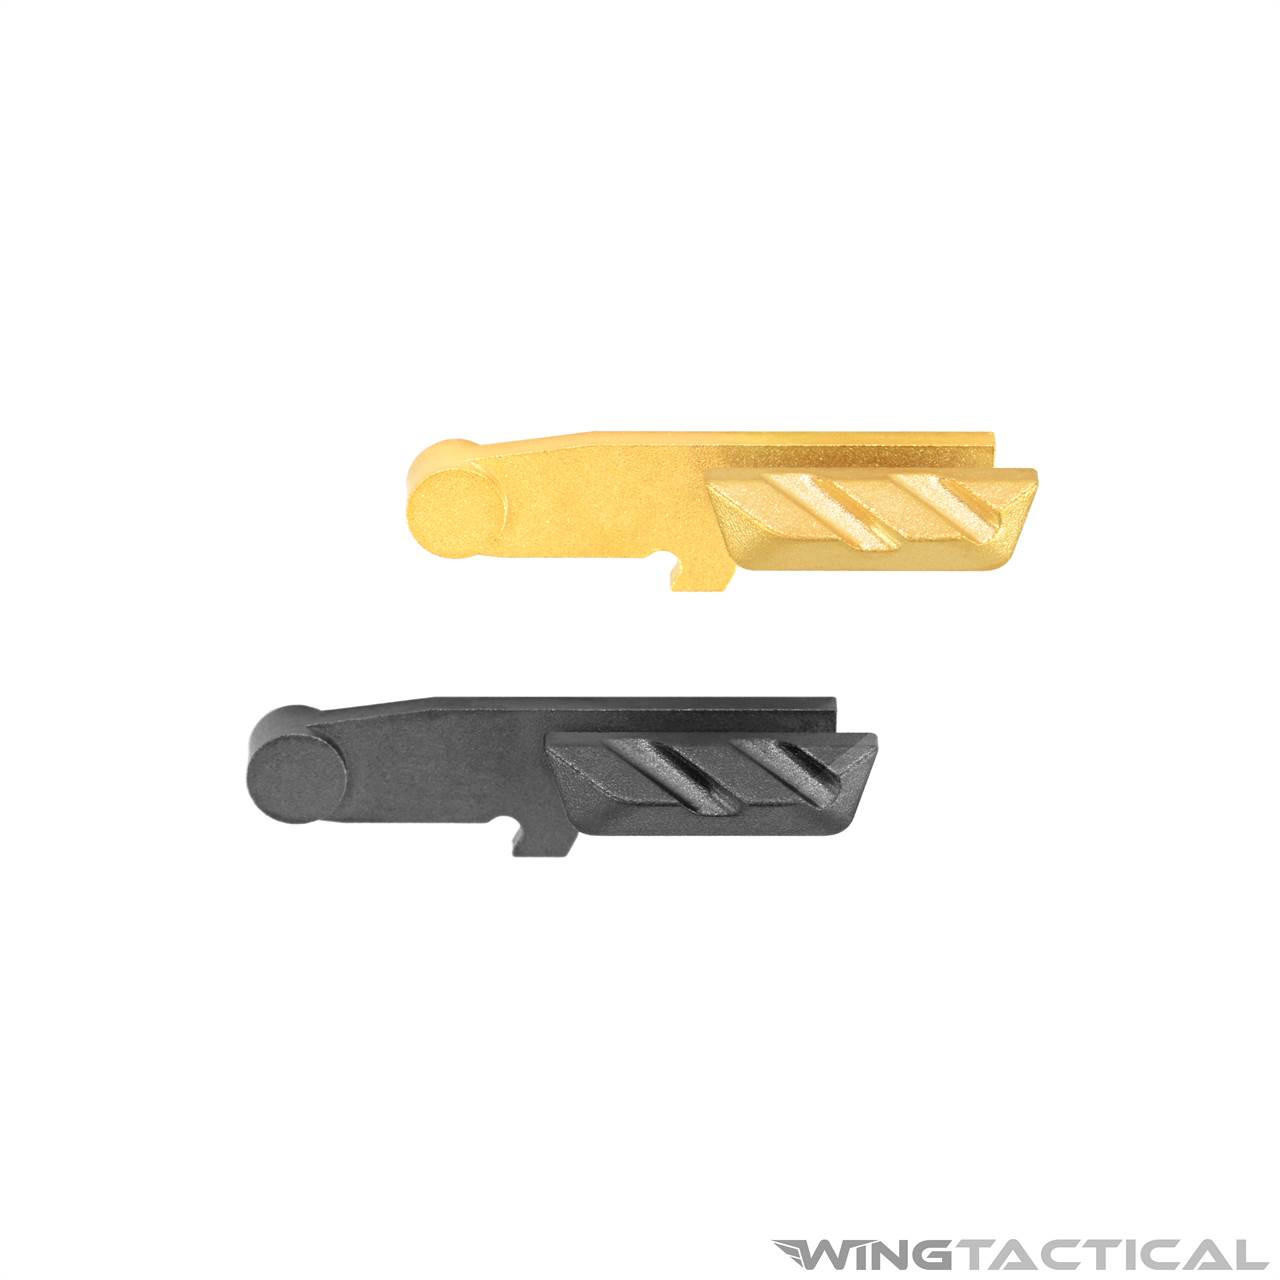  Tyrant CNC SIG Sauer P365 Extended Slide Catch Lever 